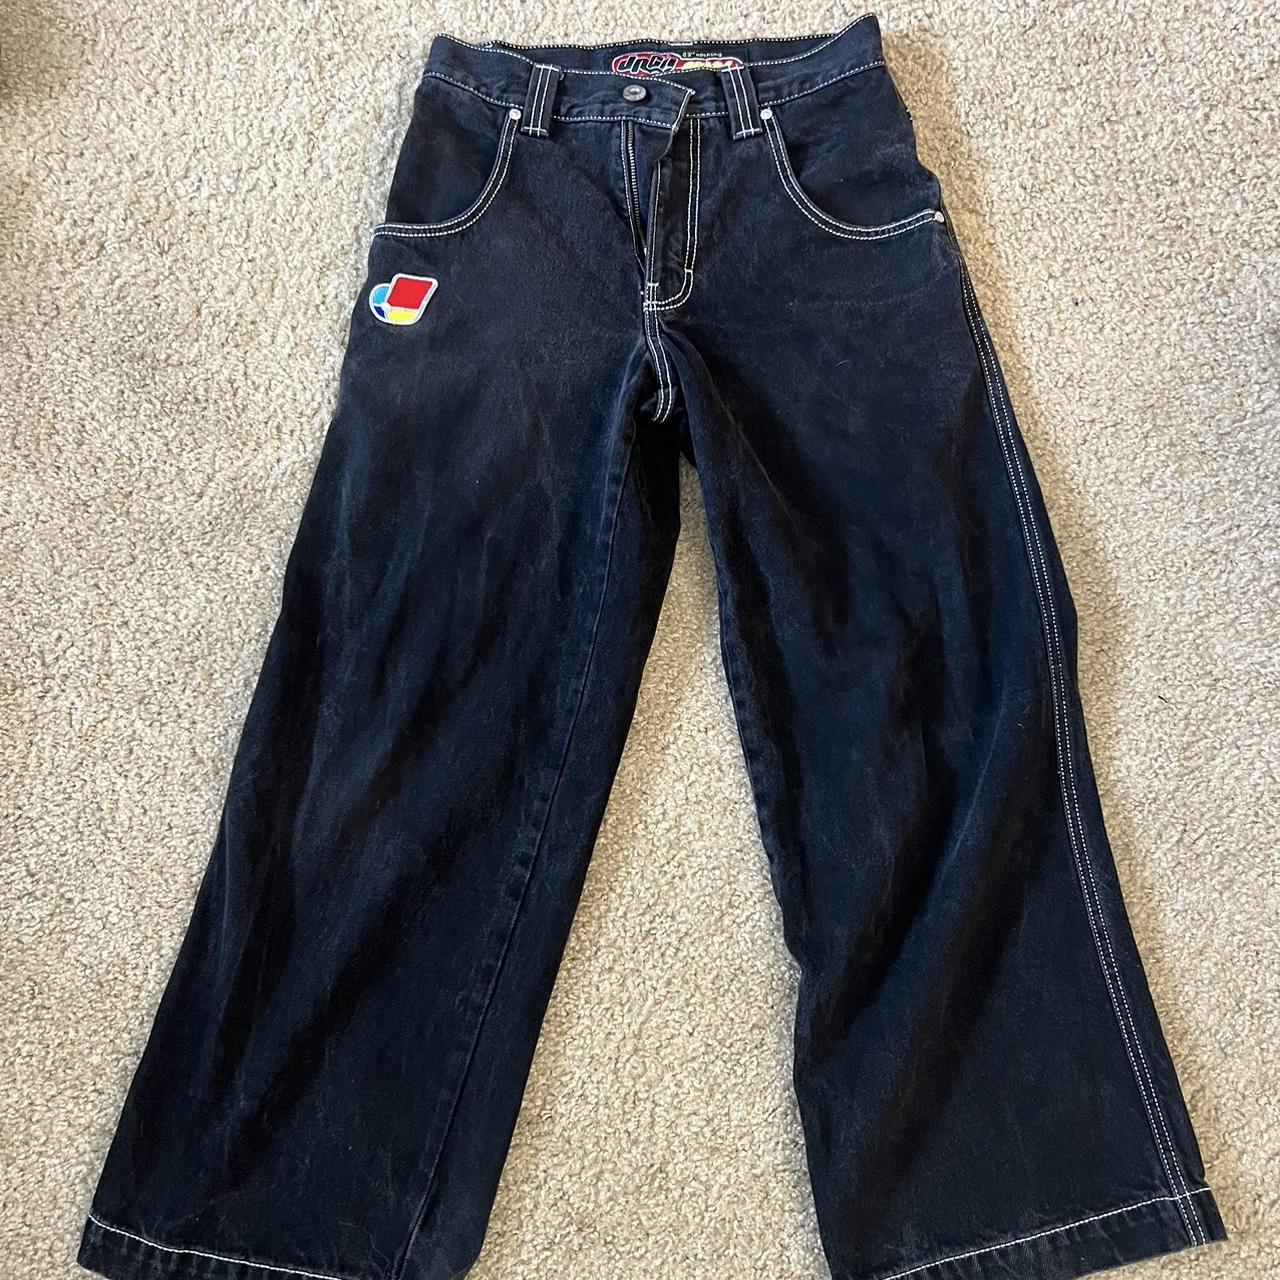 JNCO Pipes - Black 28 x 30 worn a good amount of... - Depop